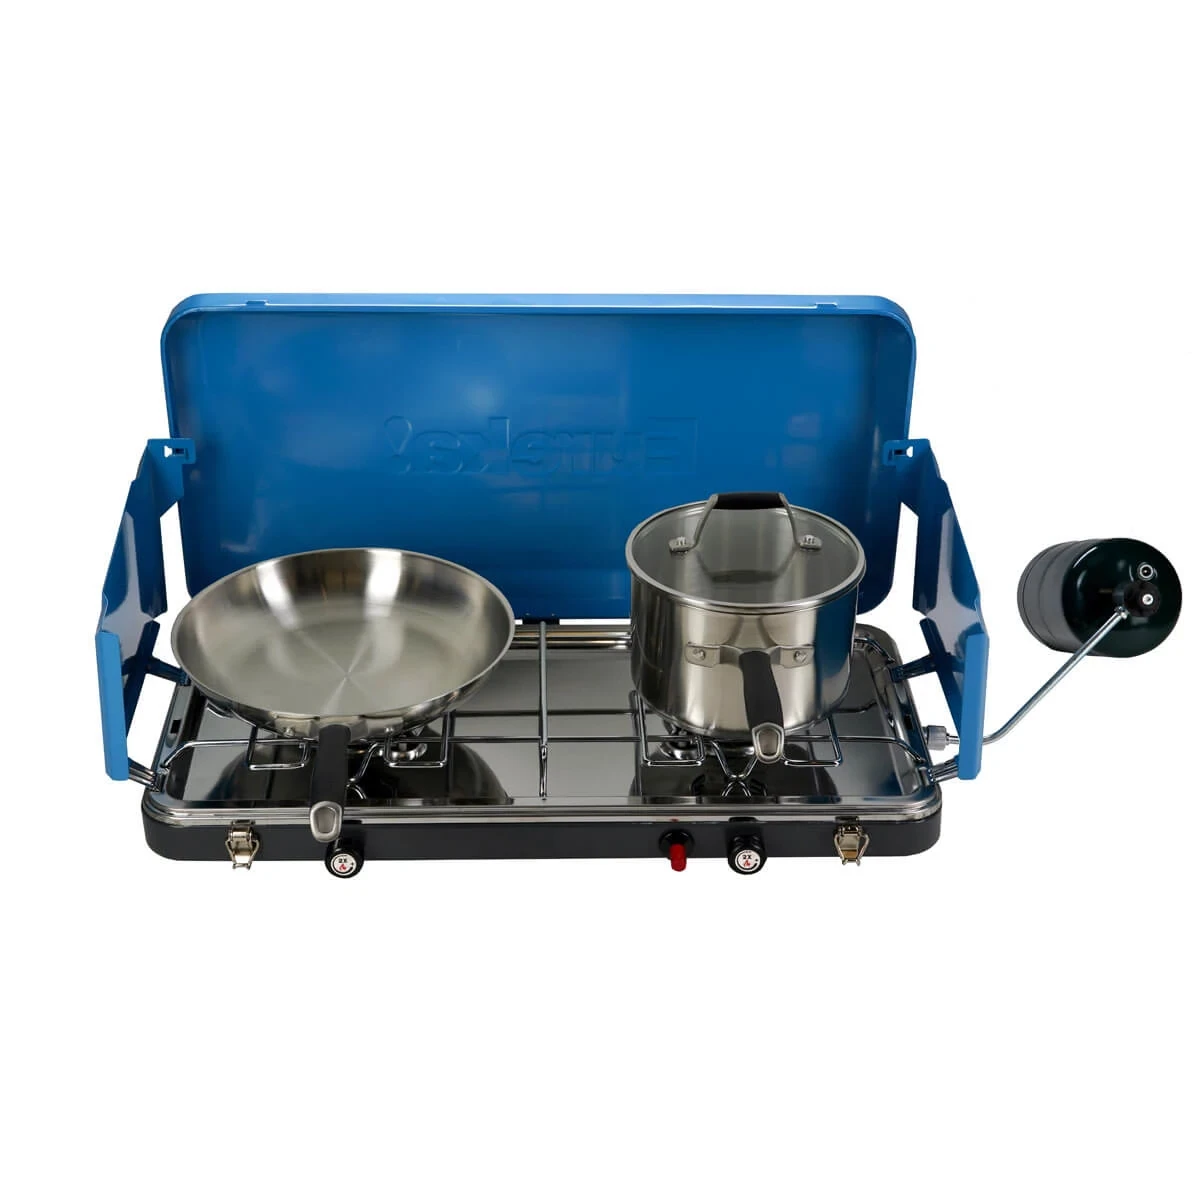 Ignite Plus Camp Stove with a pot and pan